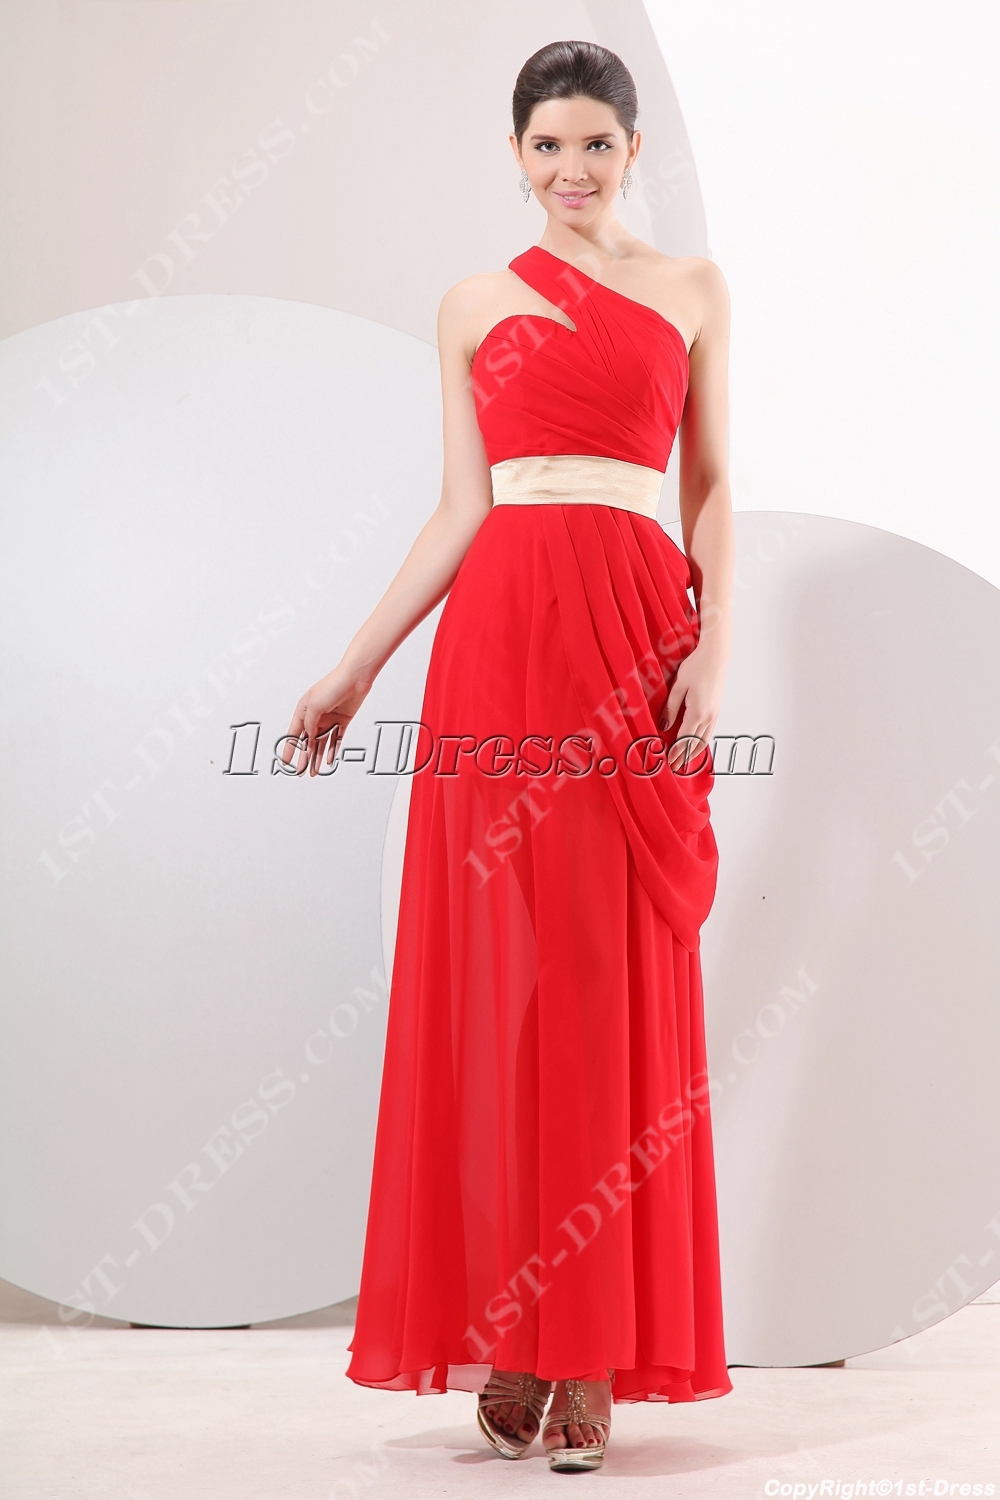 images/201311/big/Concise-Red-Chiffon-Cocktail-Dress-3528-b-1-1384442896.jpg